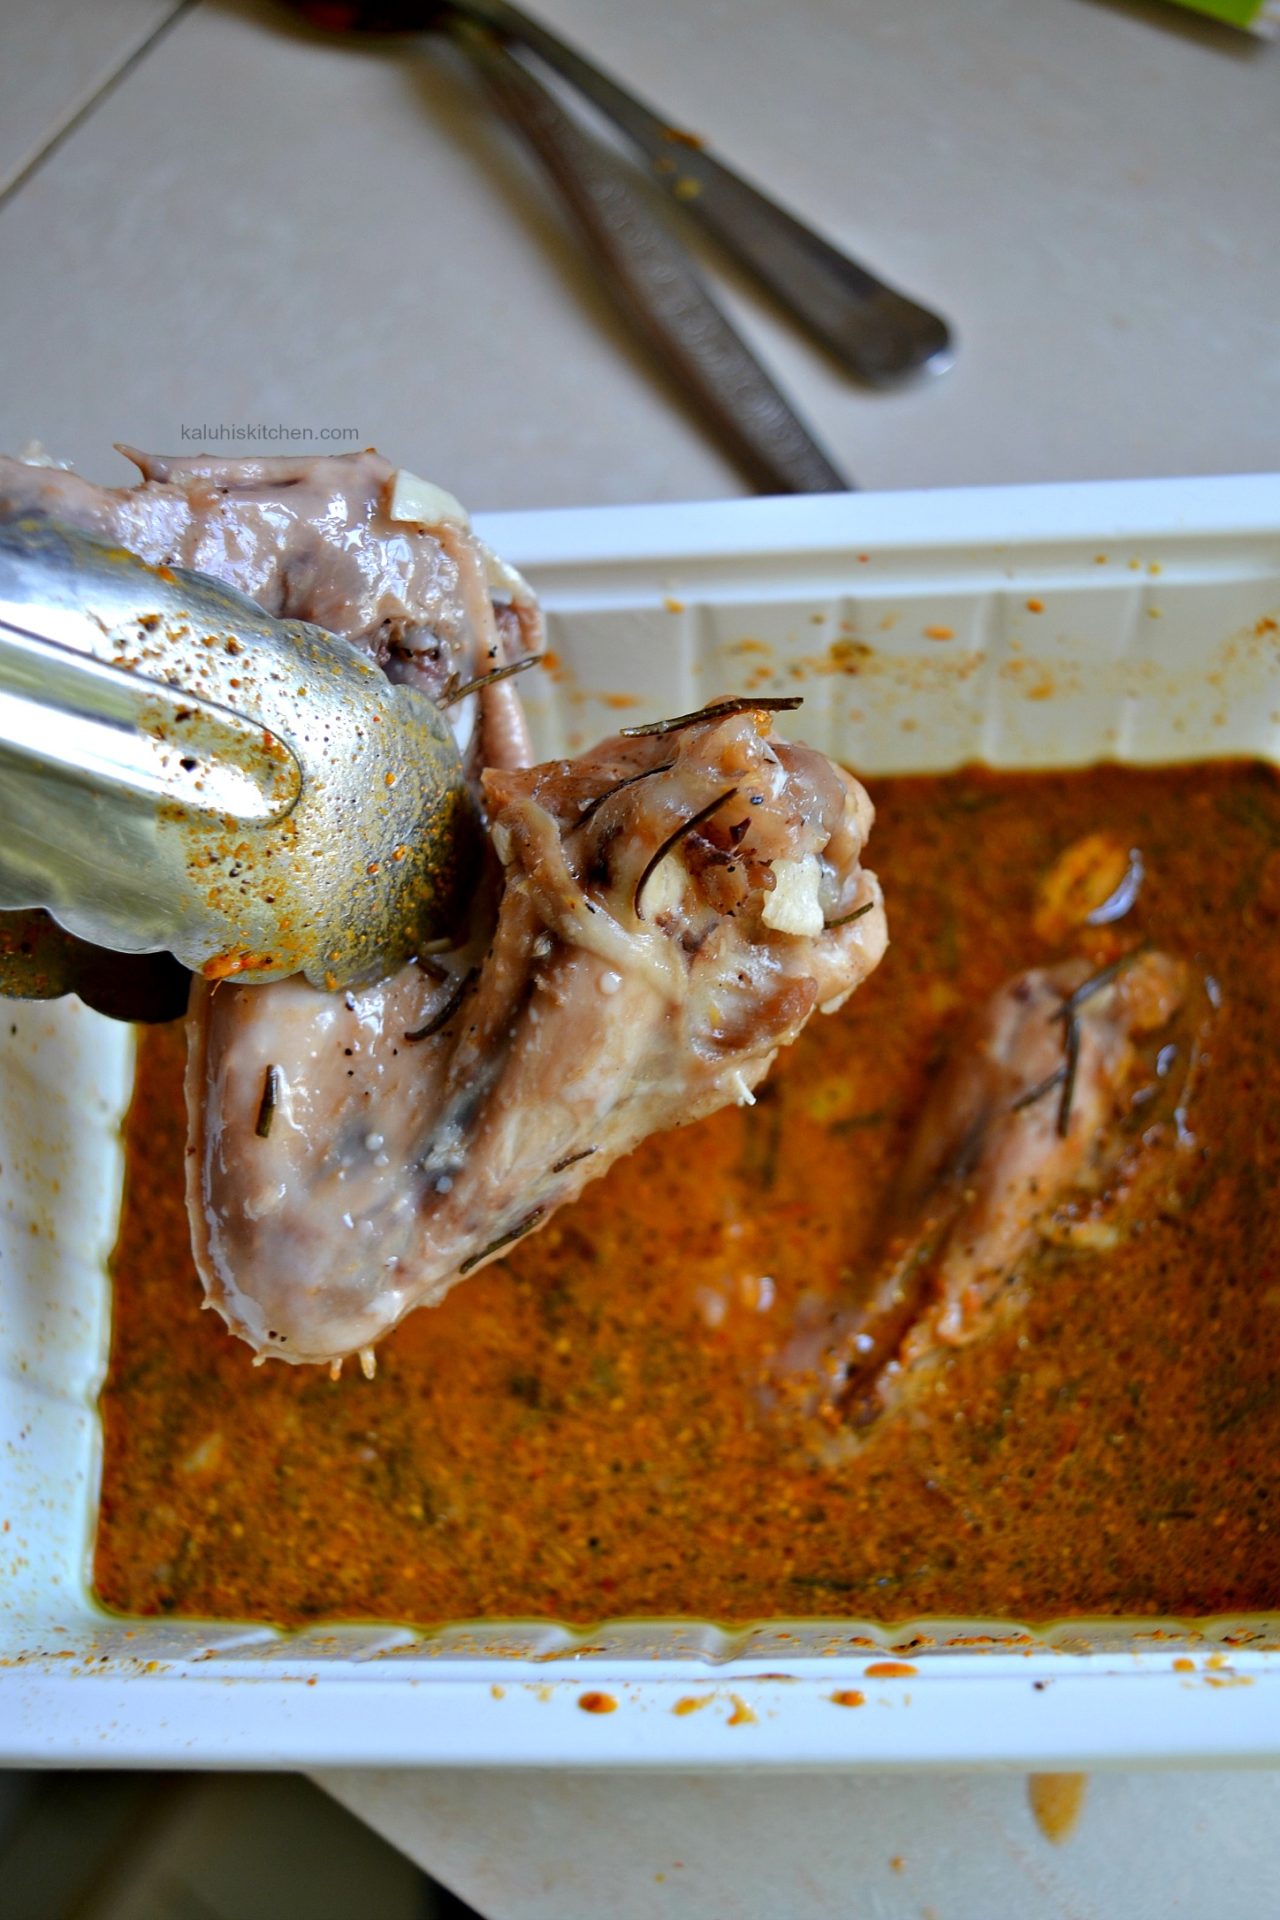 dip the chicken in the seasoning spices that have been made into a paste by adding abit of water_kaluhiskichen.com